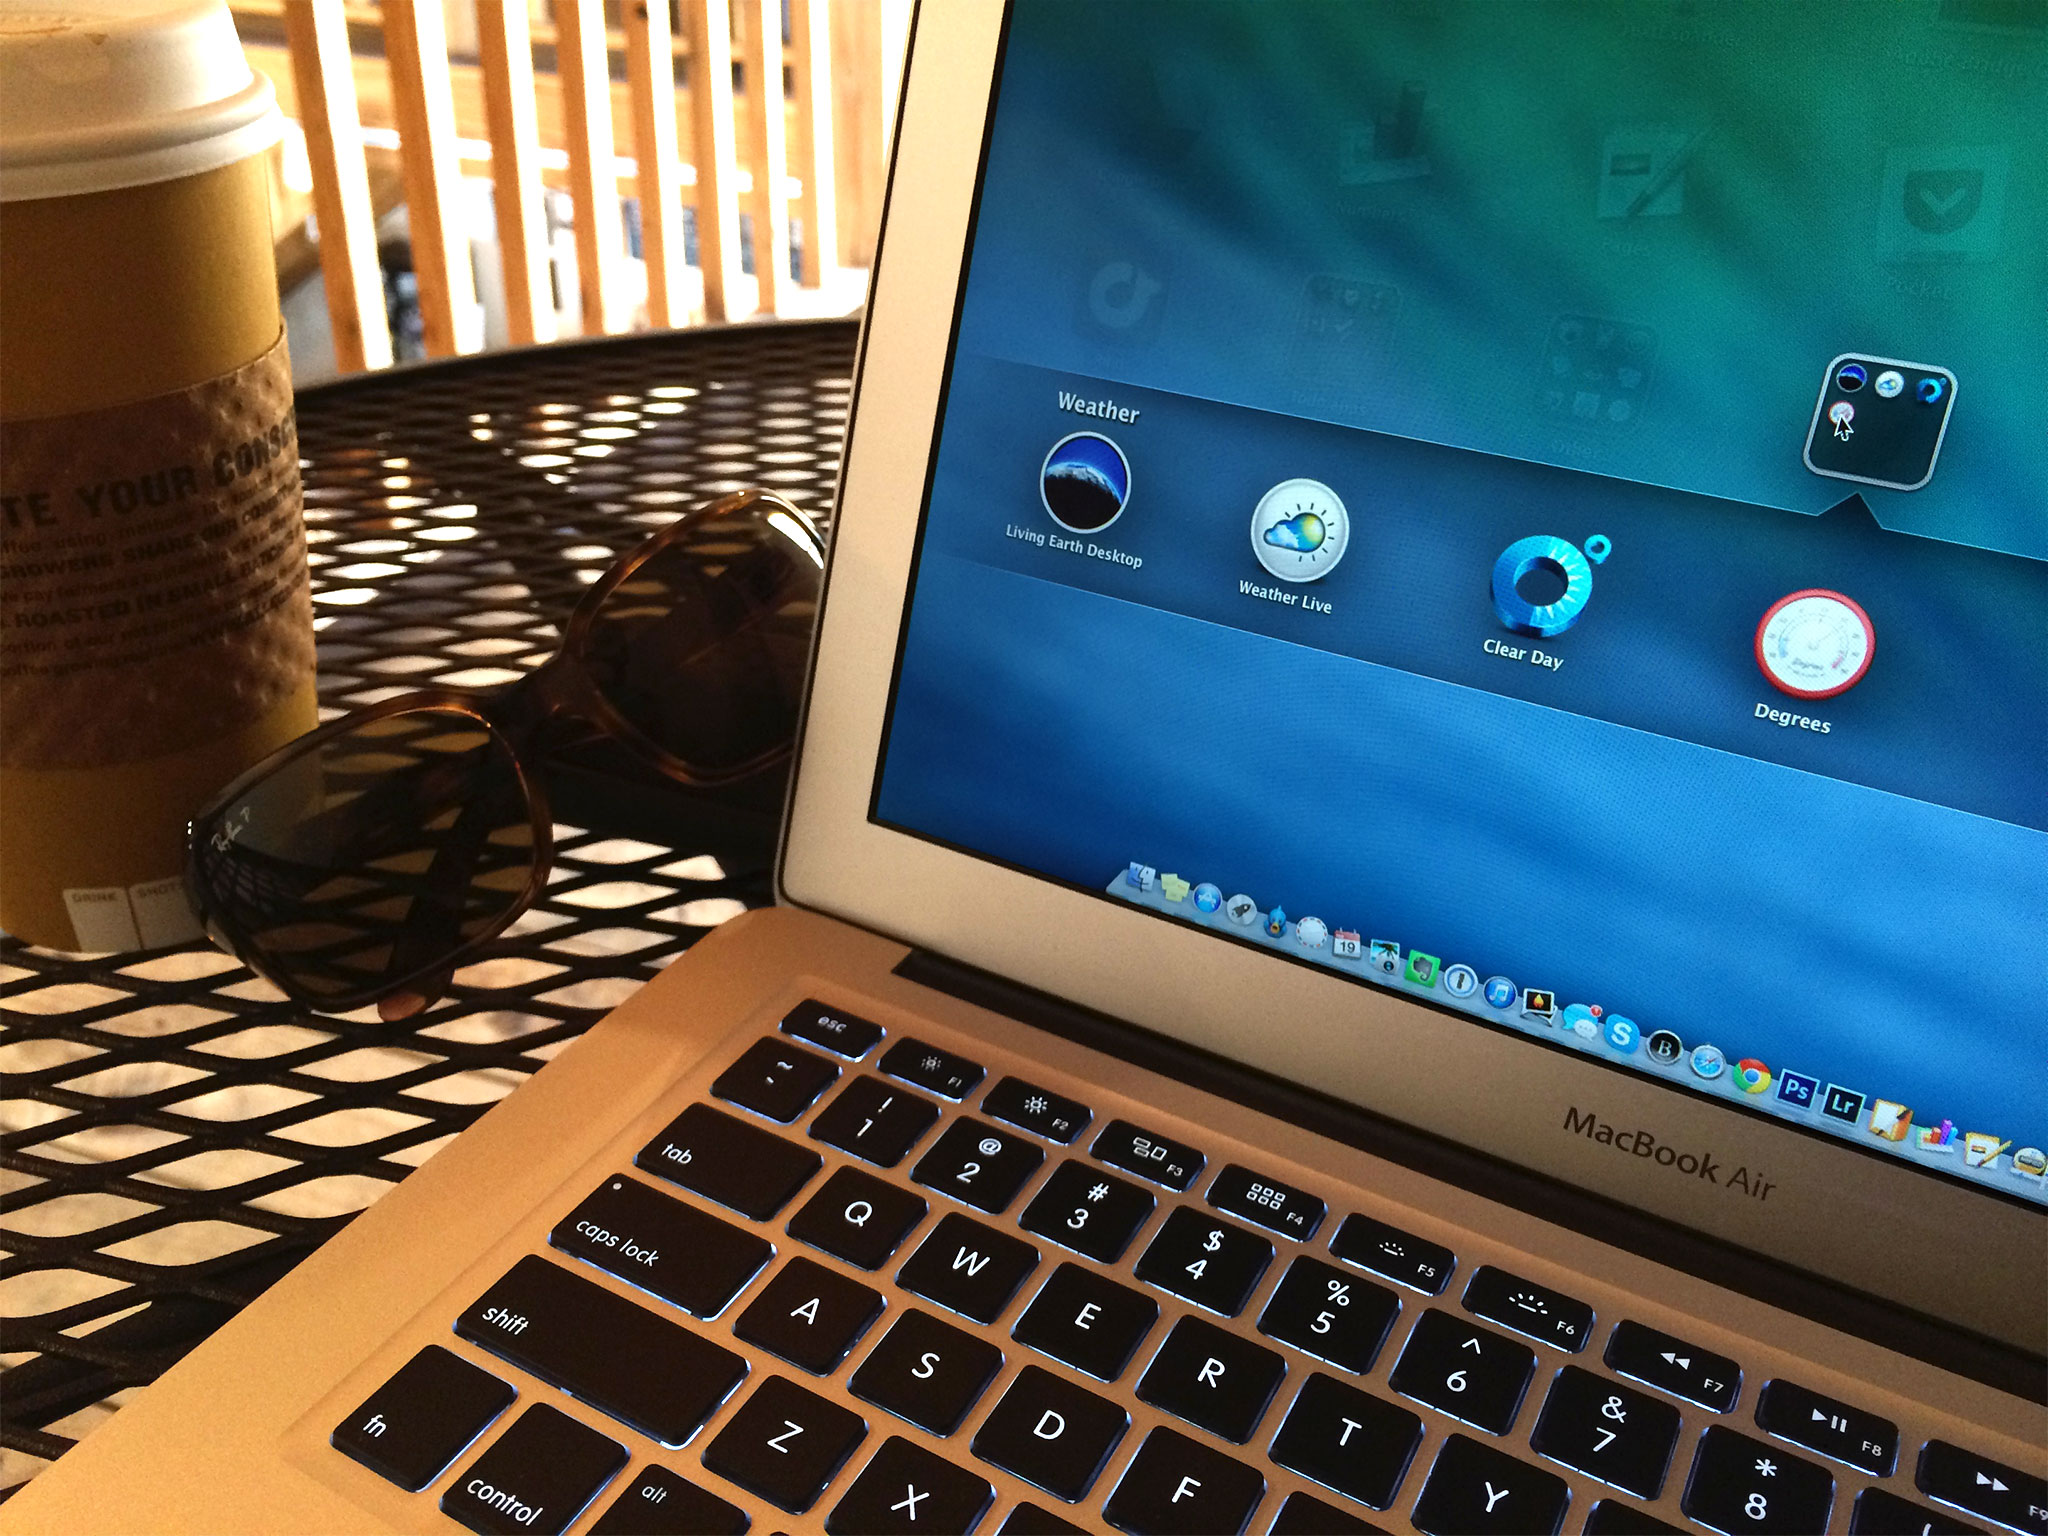 Best weather apps for Mac: Living Earth, Degrees, Clear Day, and more!